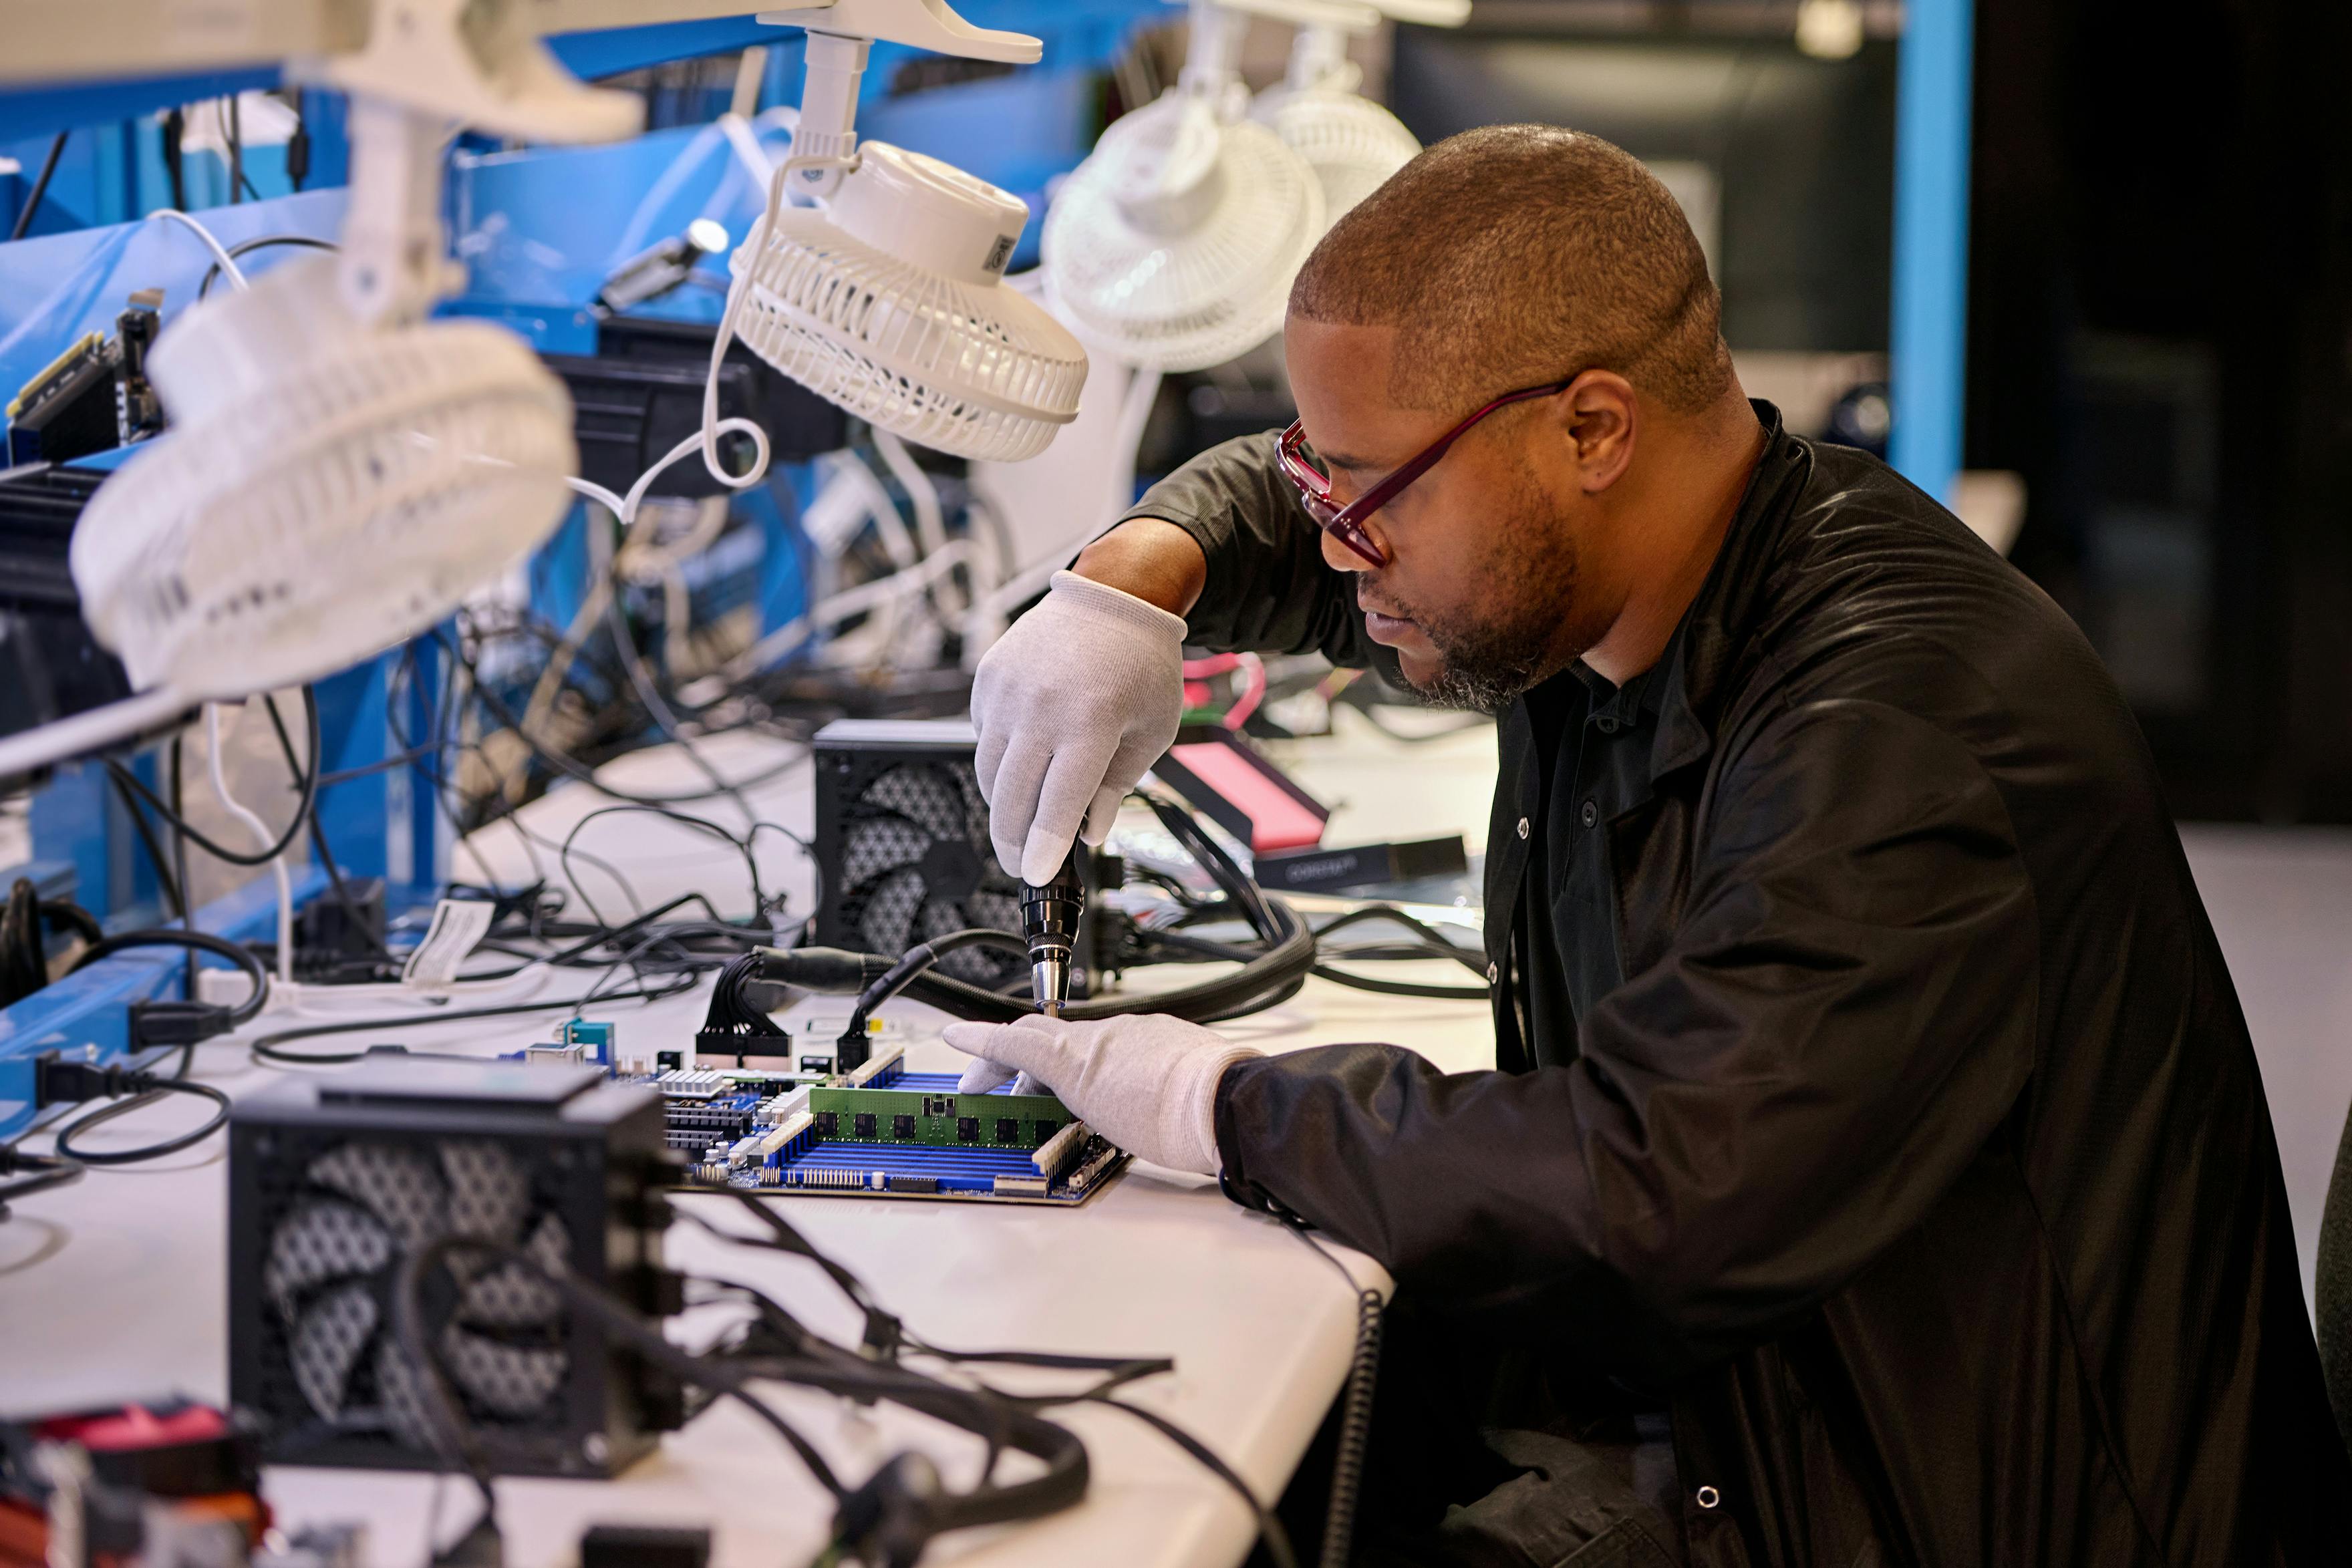 An employee performs a functional test of electronic components while wearing protective gloves